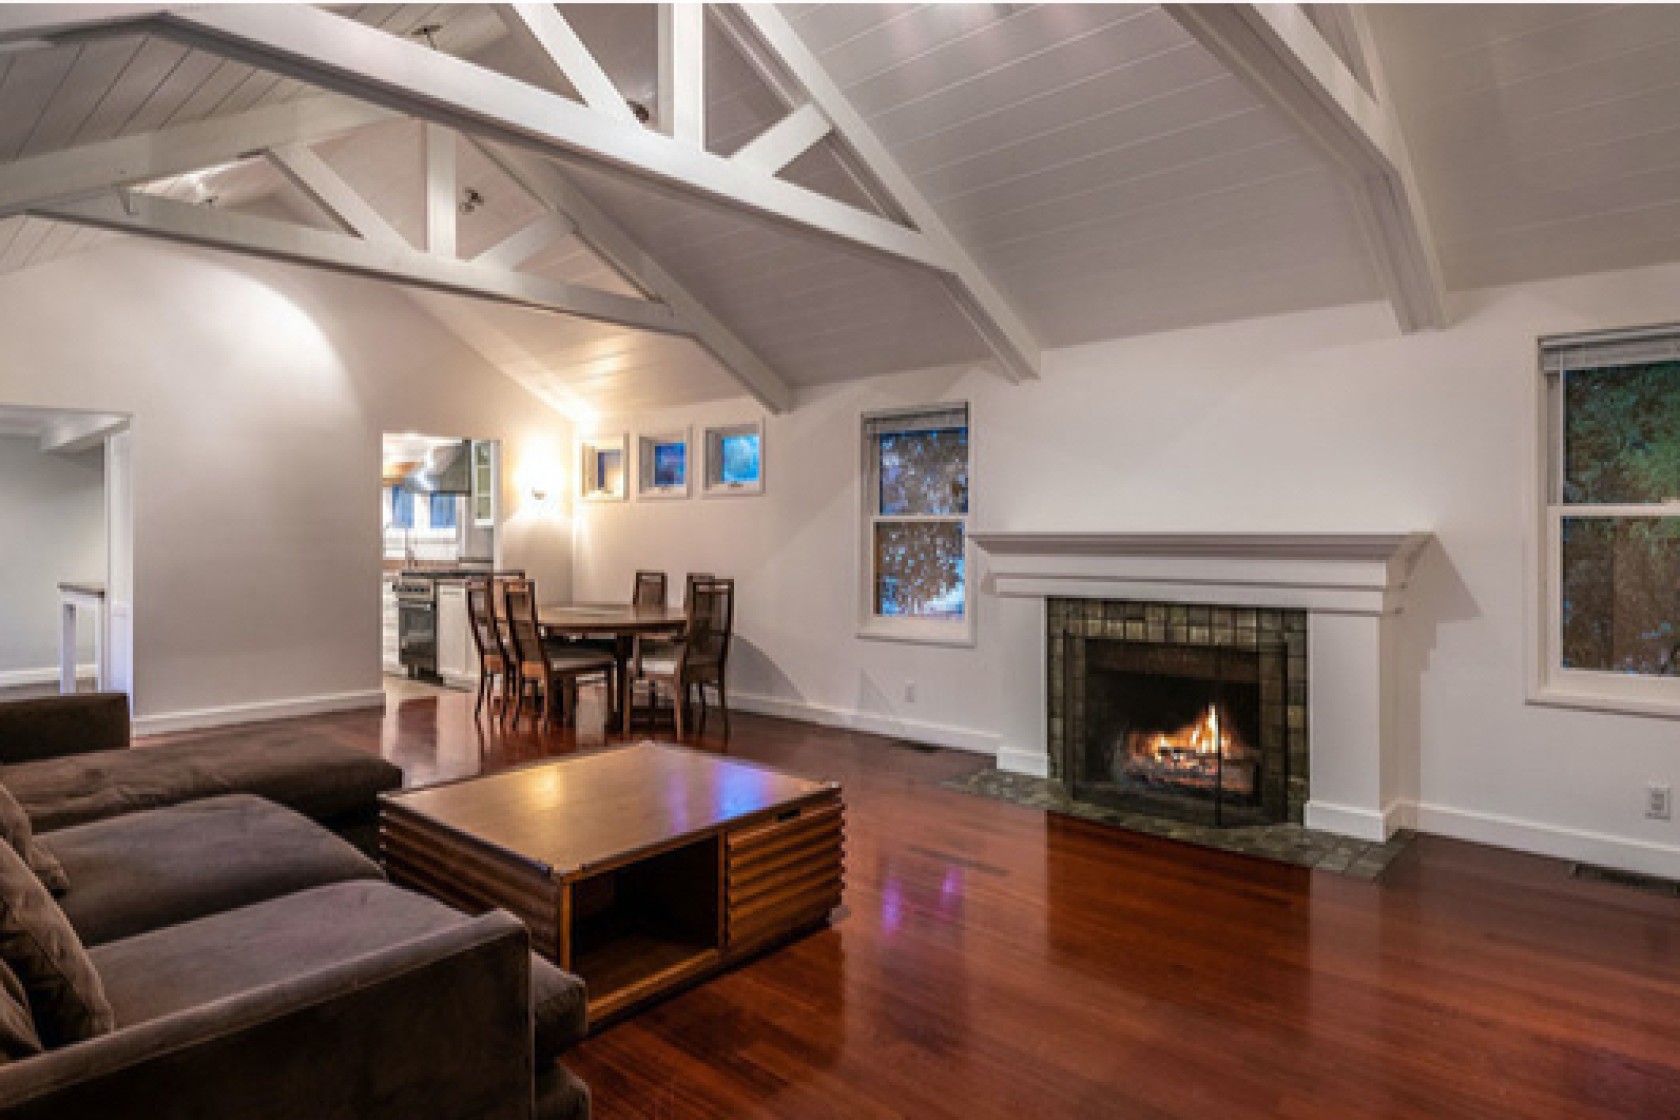 Two Story Fireplace Best Of Director Duncan Jones Wraps On A Hollywood Hills Home